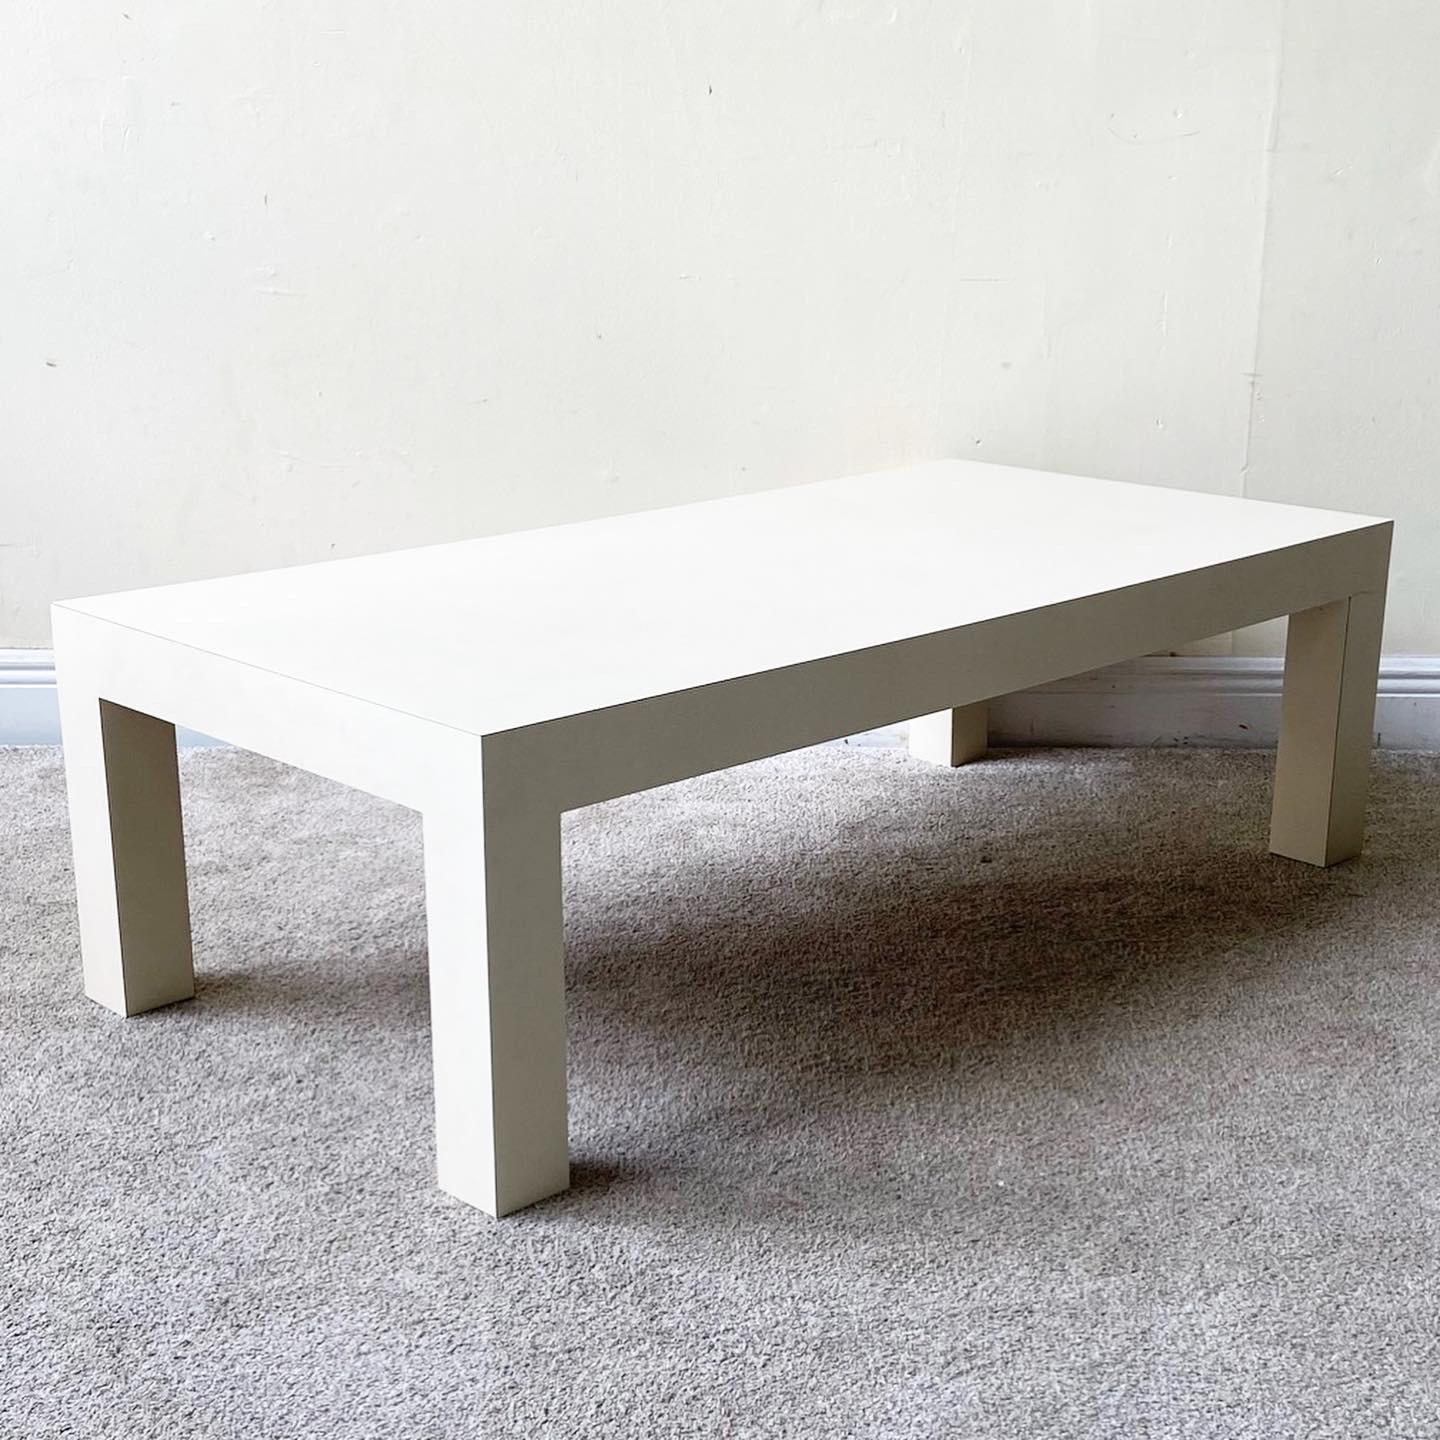 Amazing rectangular Parsons coffee table. Features an off white laminate.

Additional Information:
Material: Wood
Color: Off-White
Style: Postmodern
Time Period: 1980s
Place of origin: USA
Dimension: 48ʺ W × 24ʺ D × 15ʺ H